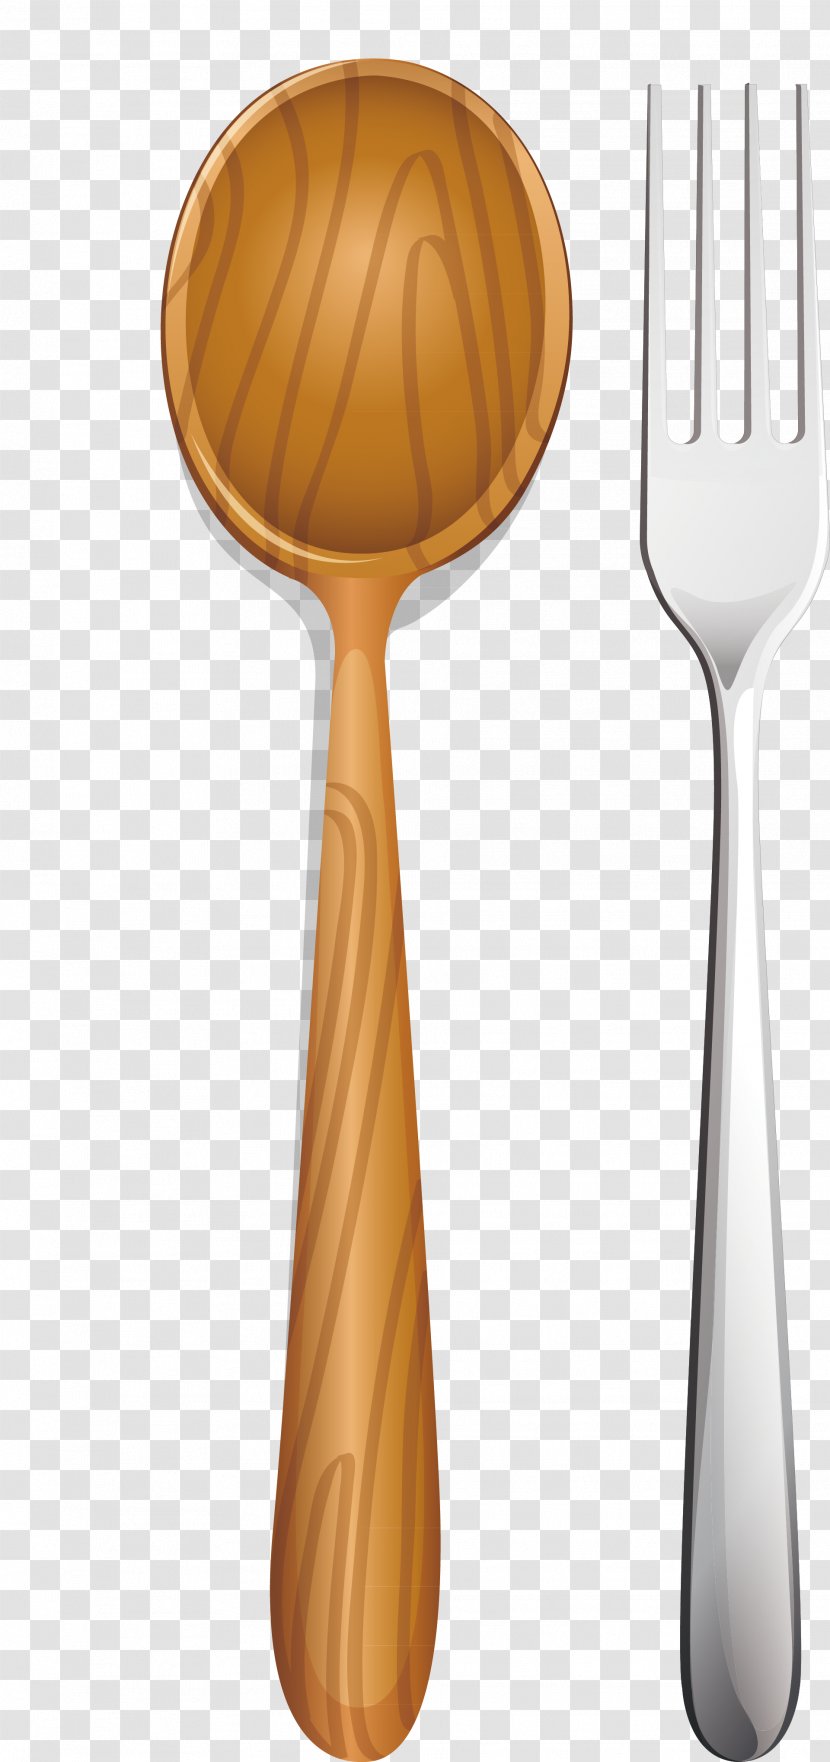 Wooden Spoon Fork Ladle Clip Art - Bowl - The Is Beautifully Decorated And Patterned Transparent PNG